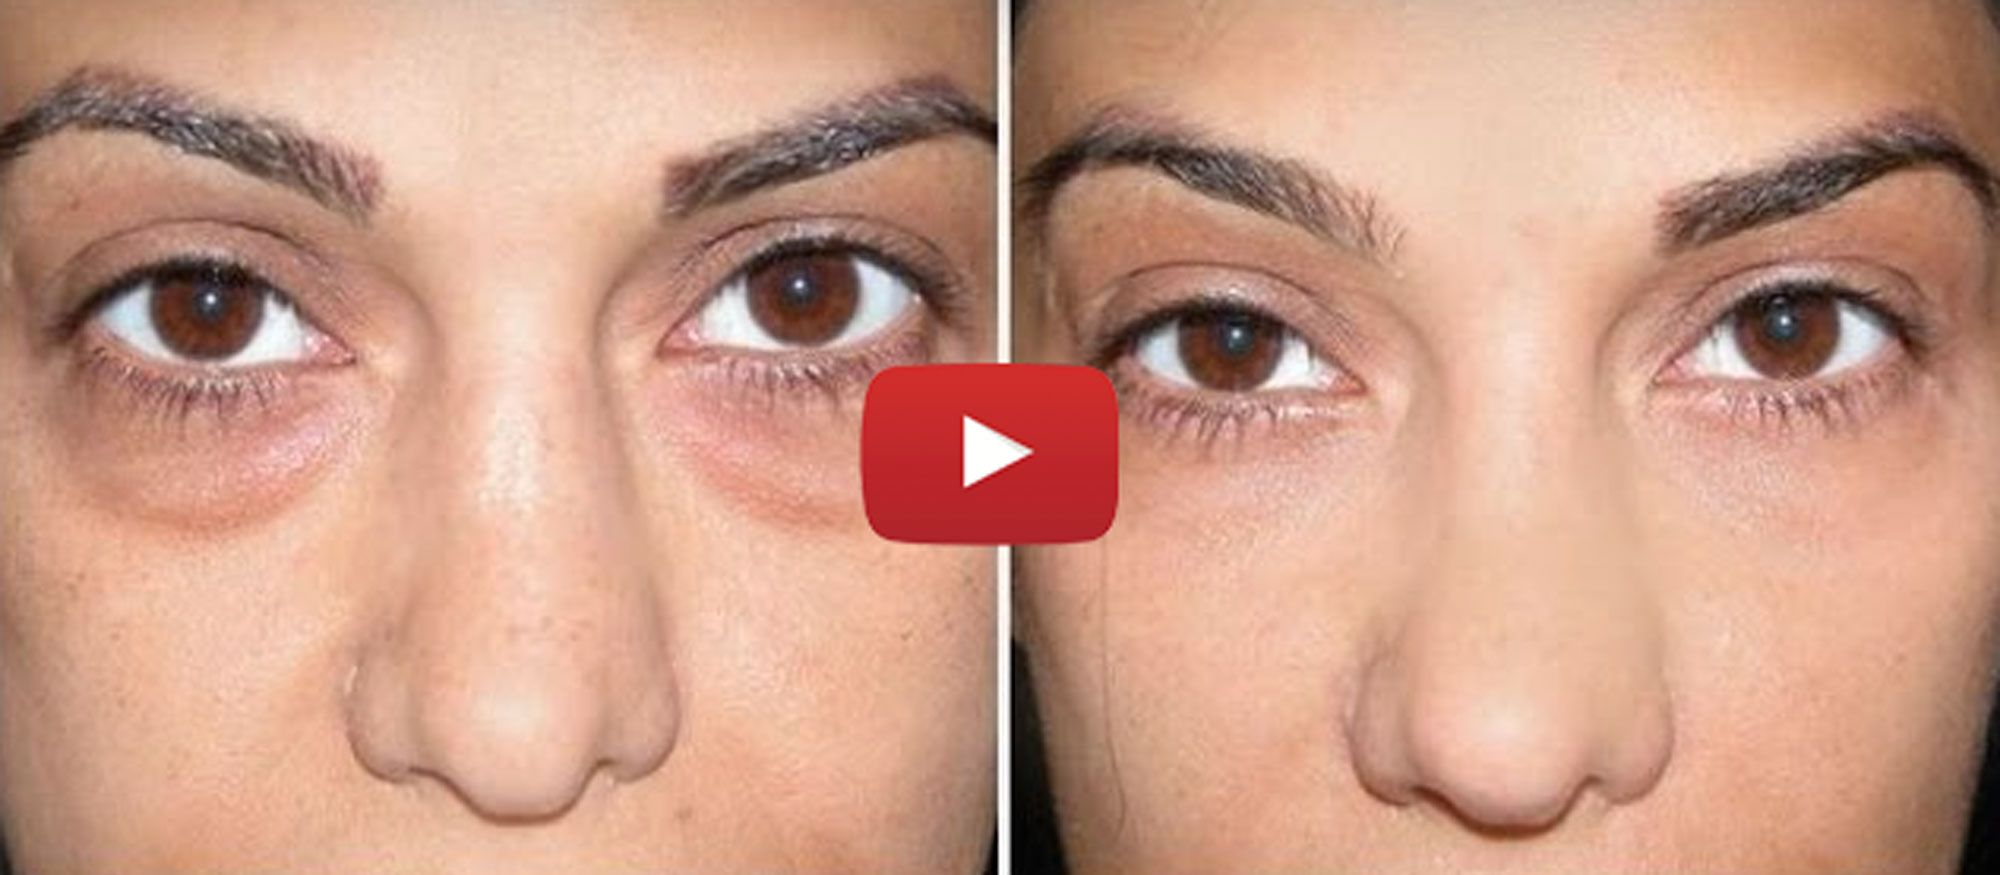 Makeup For Under Eye Bags Actually Using Baking Soda To Get Rid Of Your Undereye Circles Is A